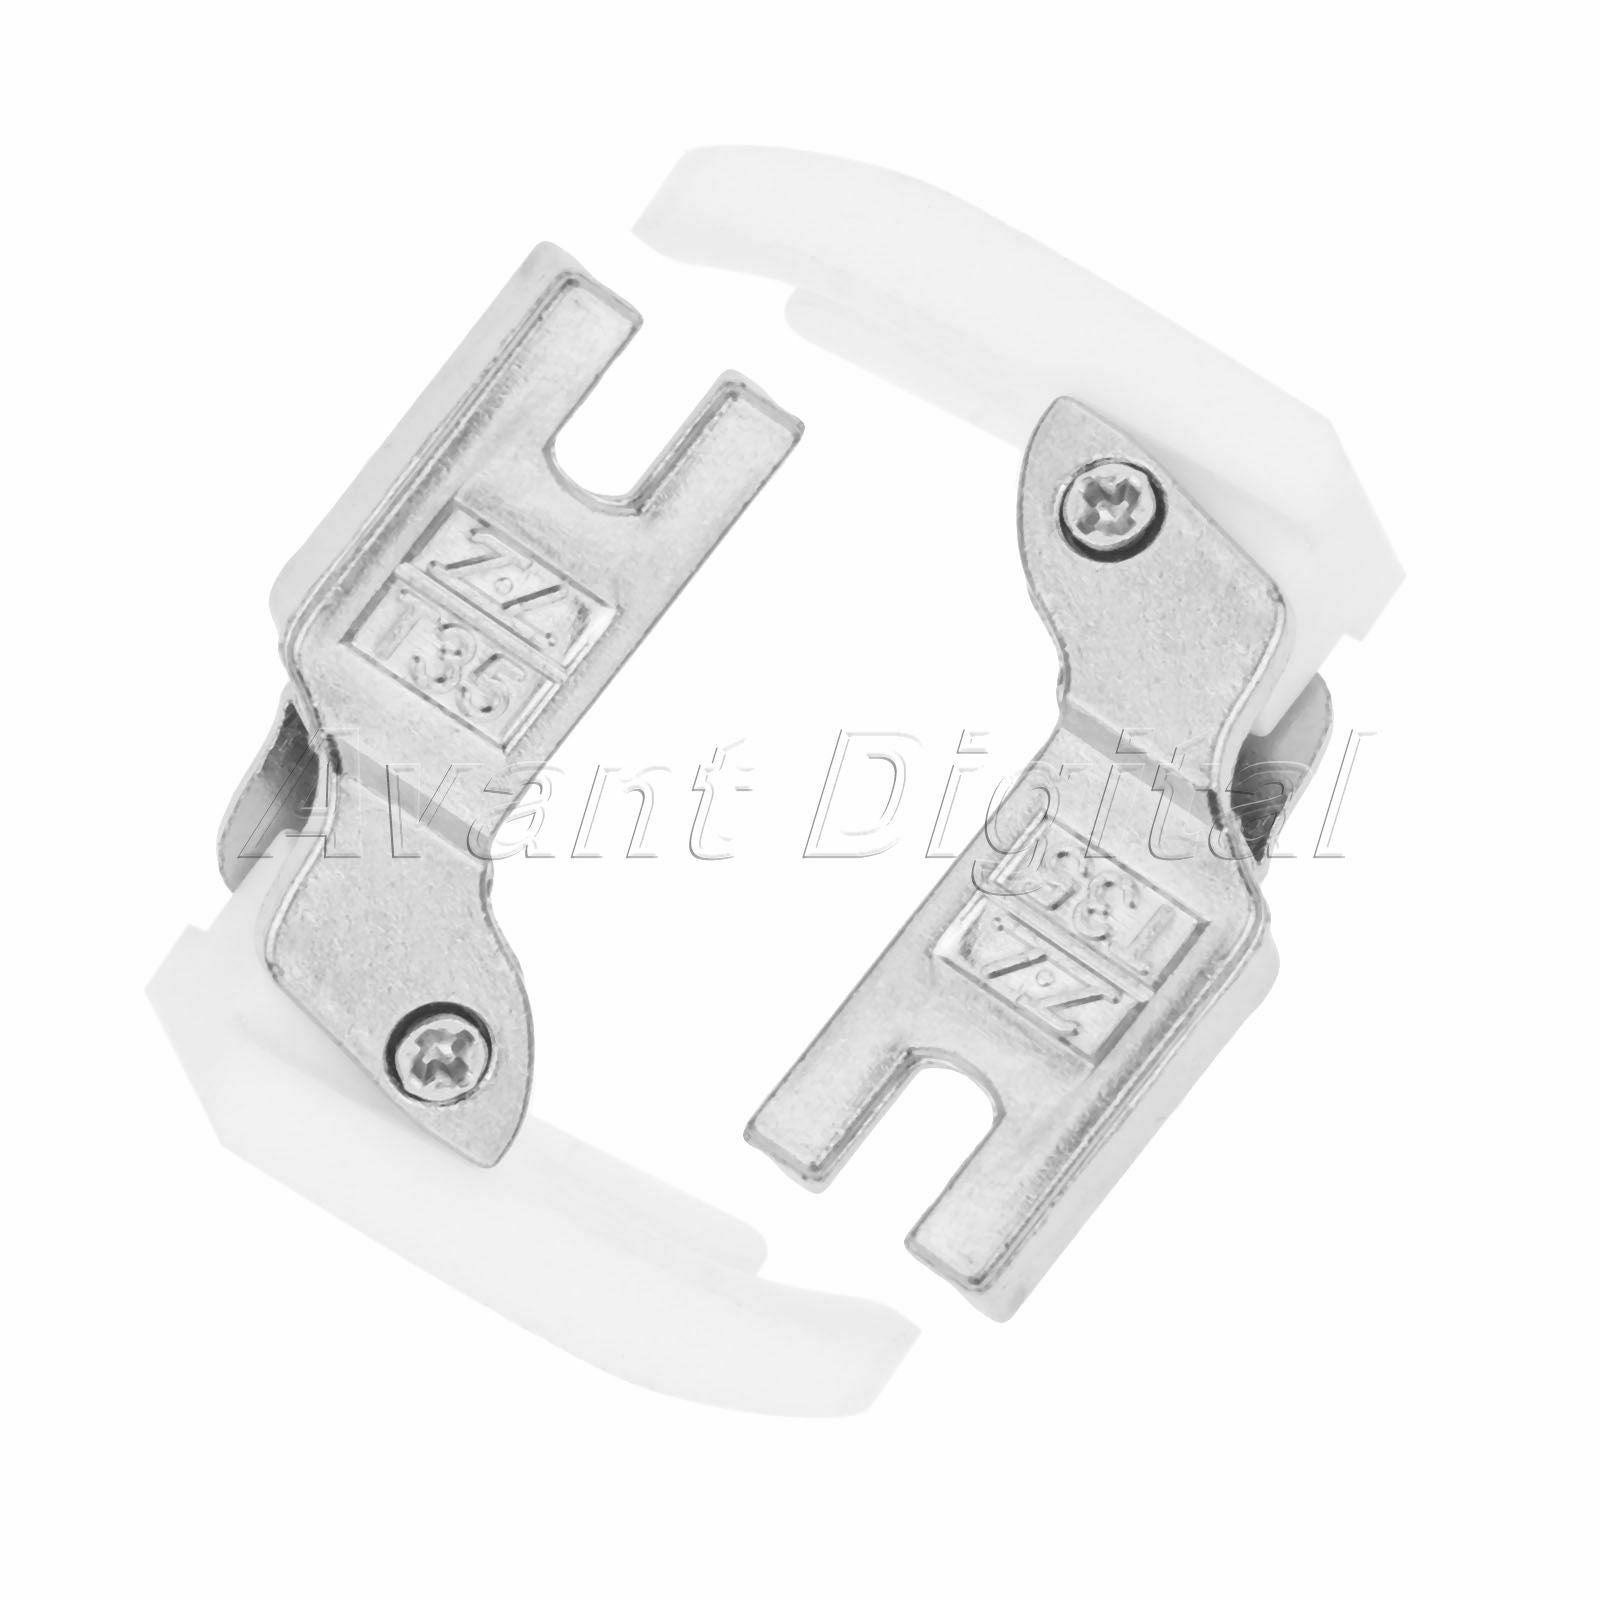 2Pcs High Shank Plastic Presser Foot For Industrial Single Needle Sewing Machine